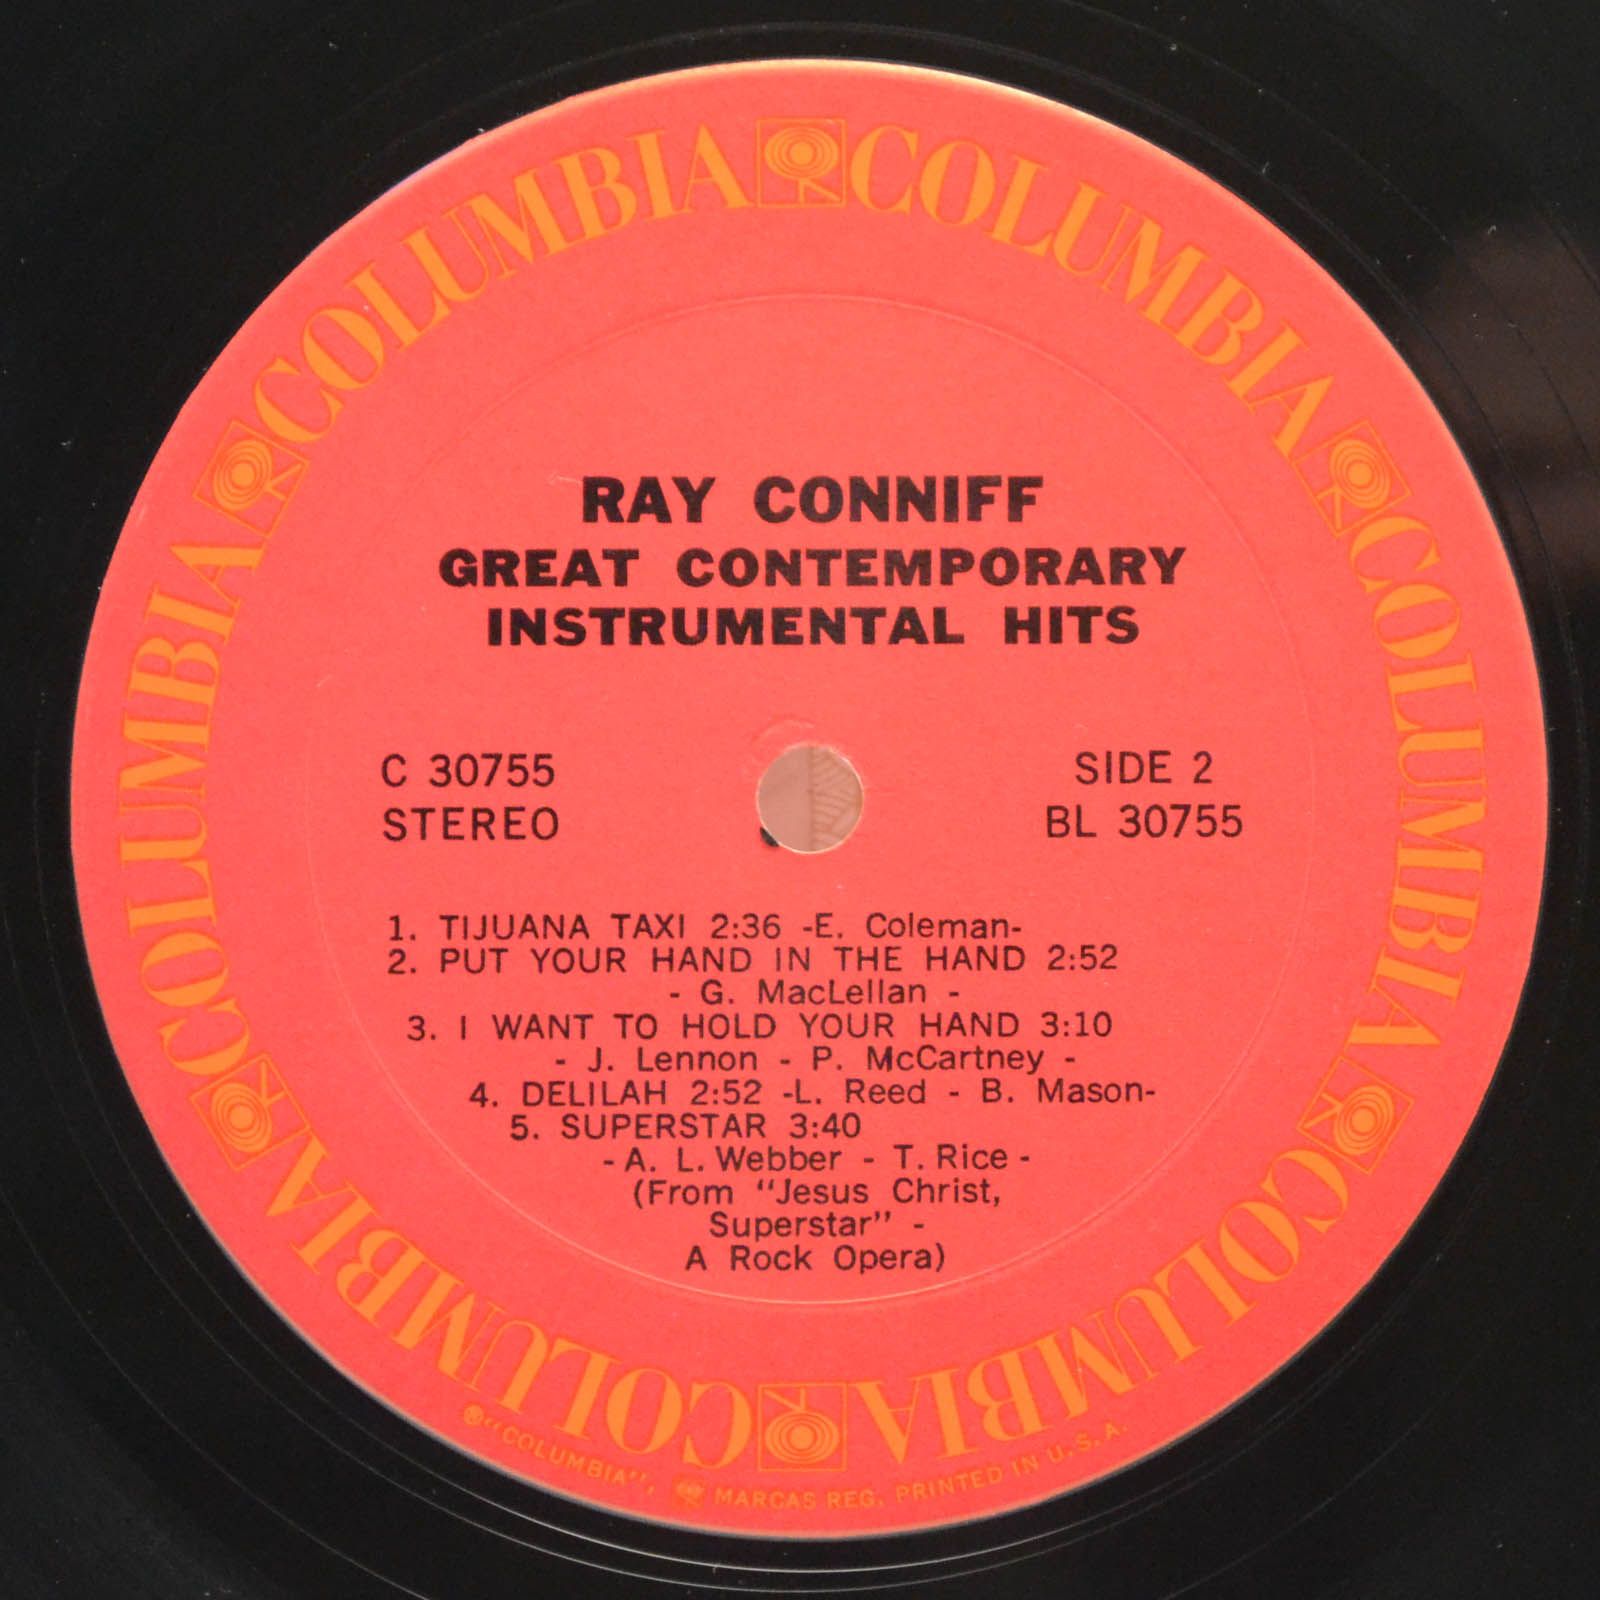 Ray Conniff — Great Contemporary Instrumental Hits (USA), 1971